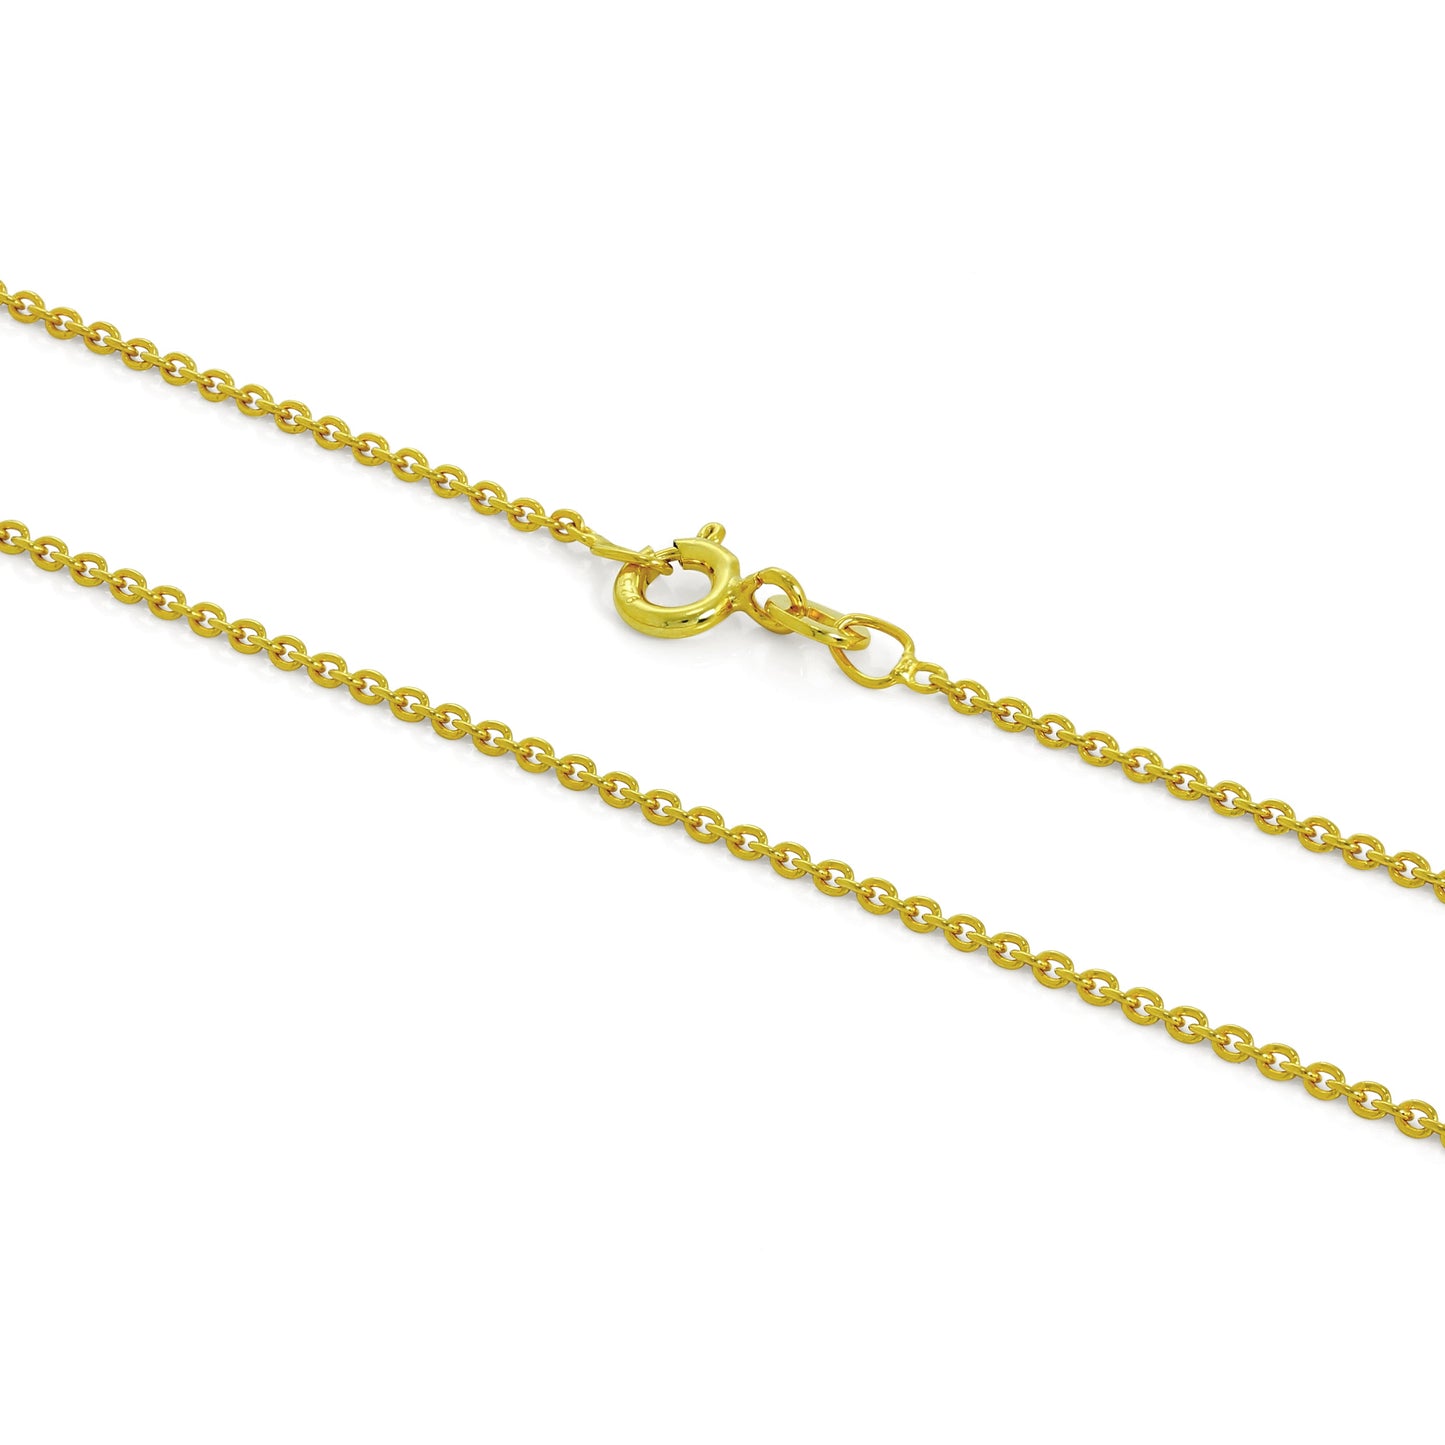 Gold Plated Sterling Silver 1mm Cable Chain 16 - 24 Inches